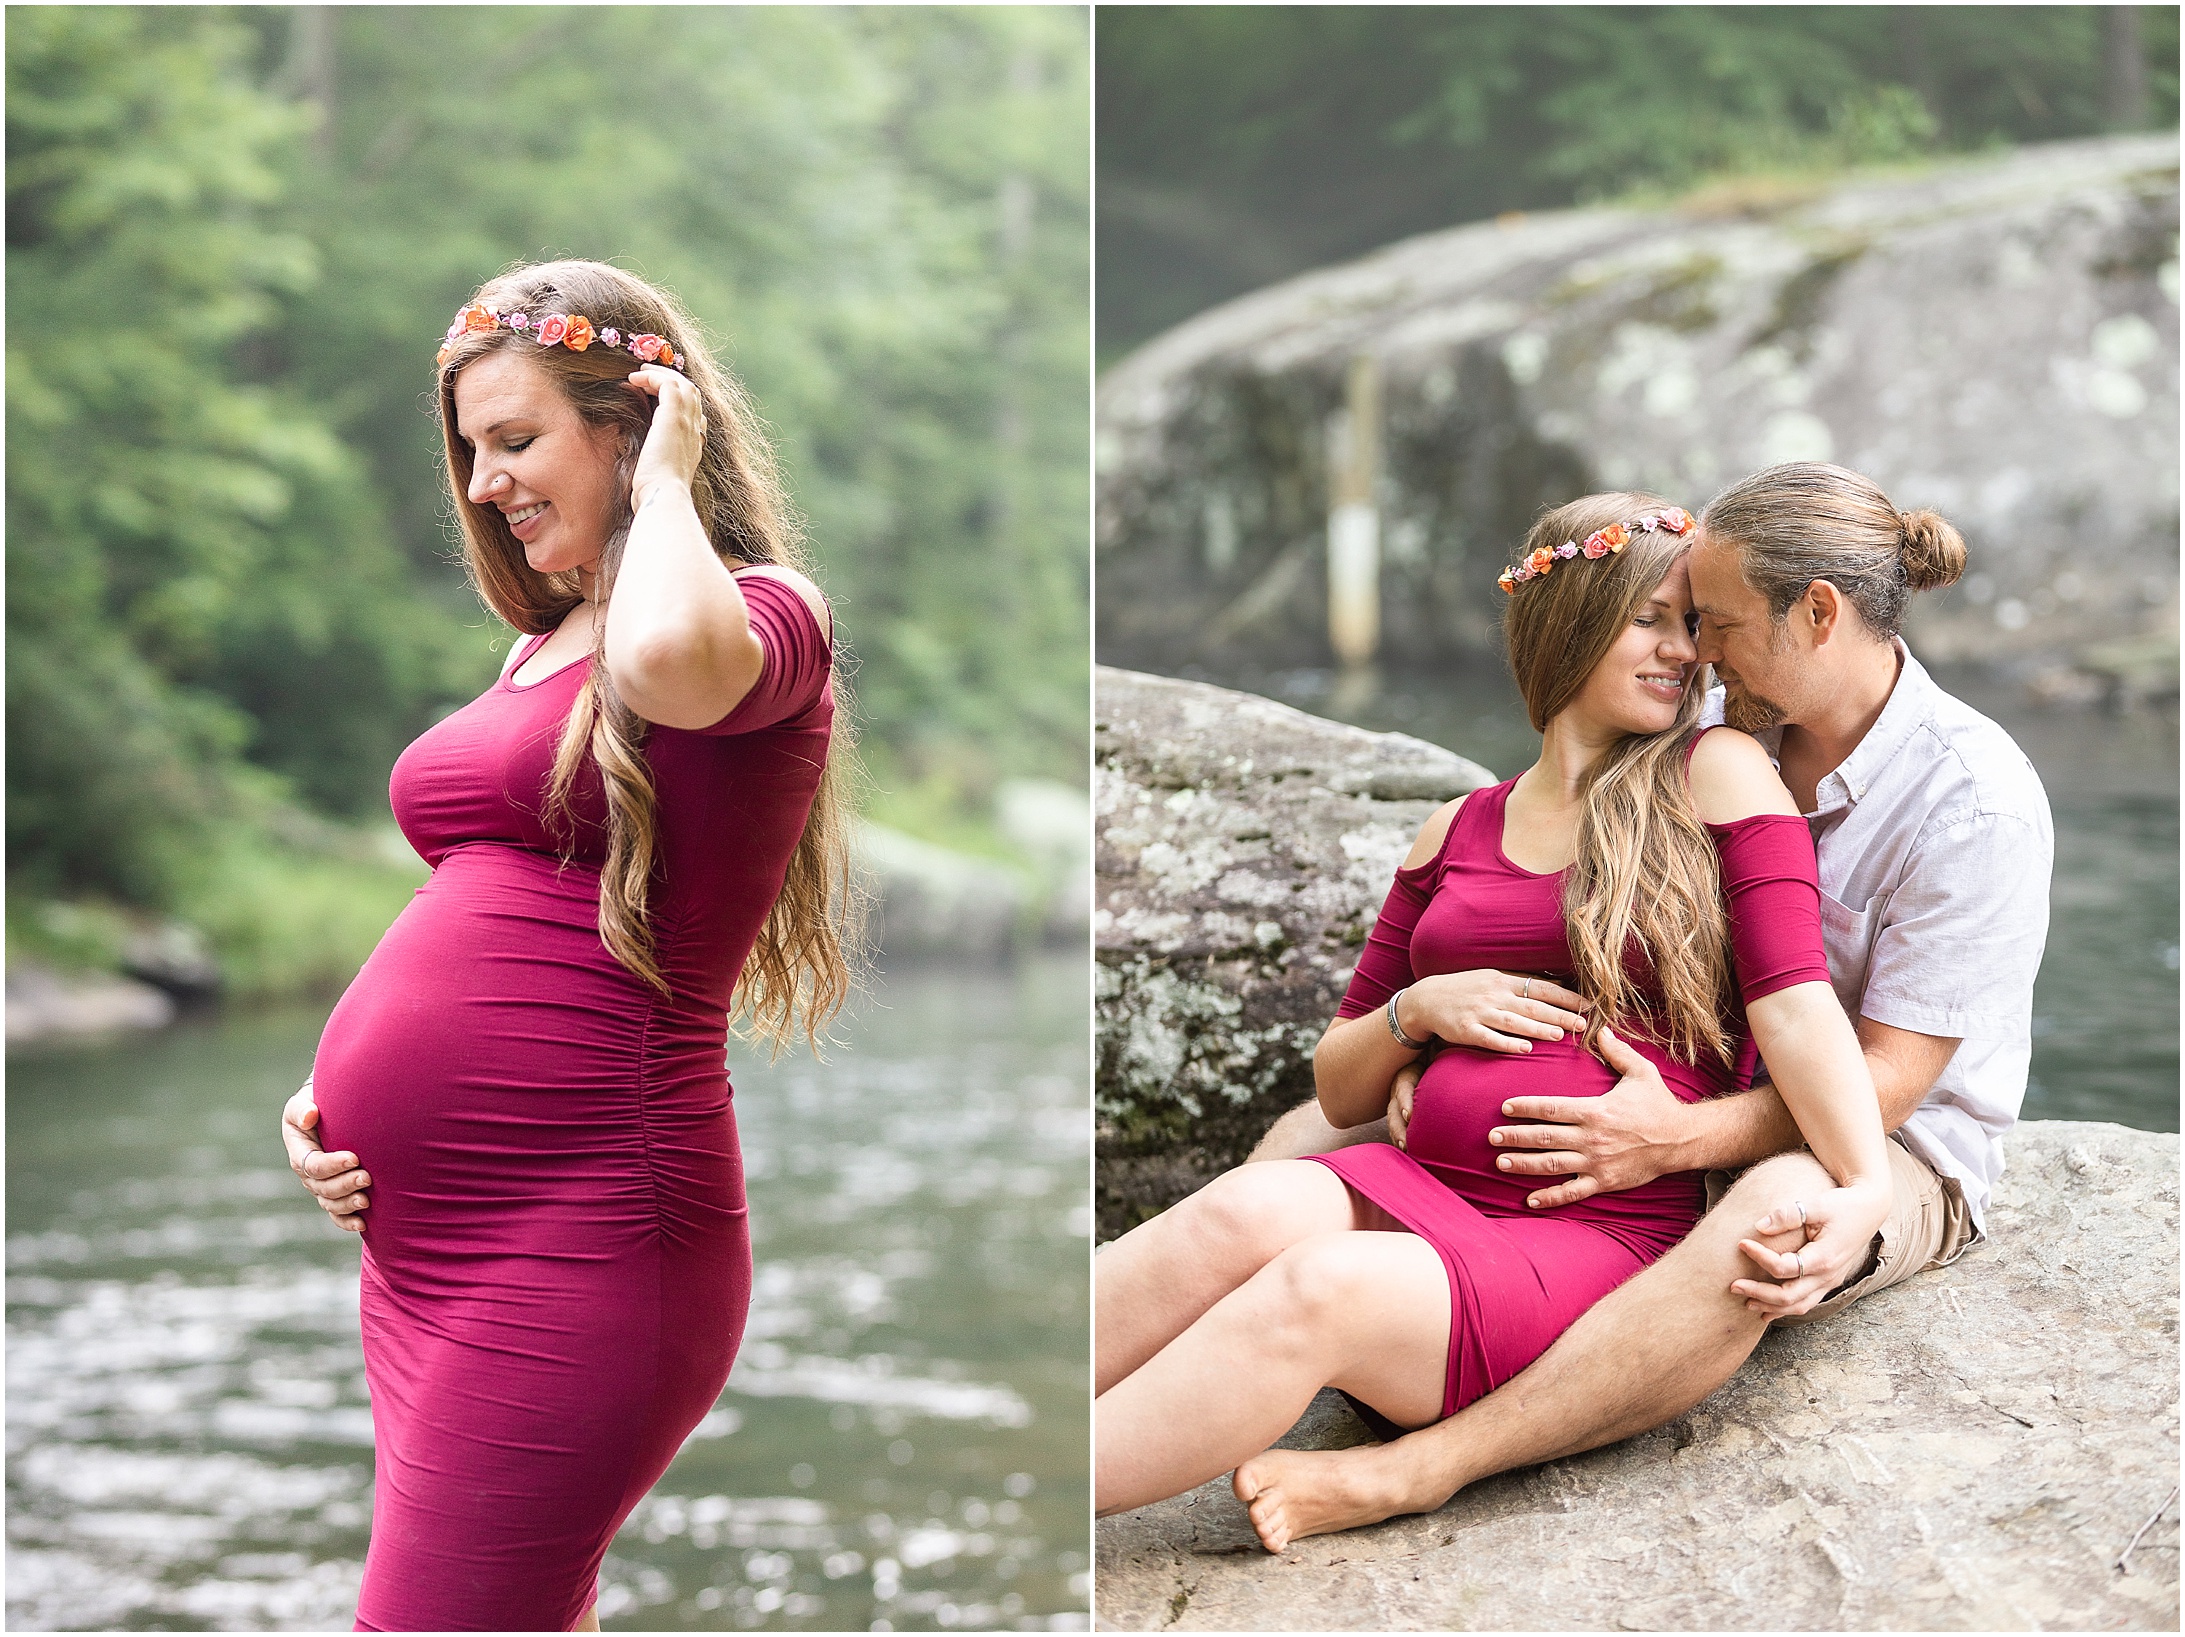 Detail Foto Maternity Outdoor Nomer 26